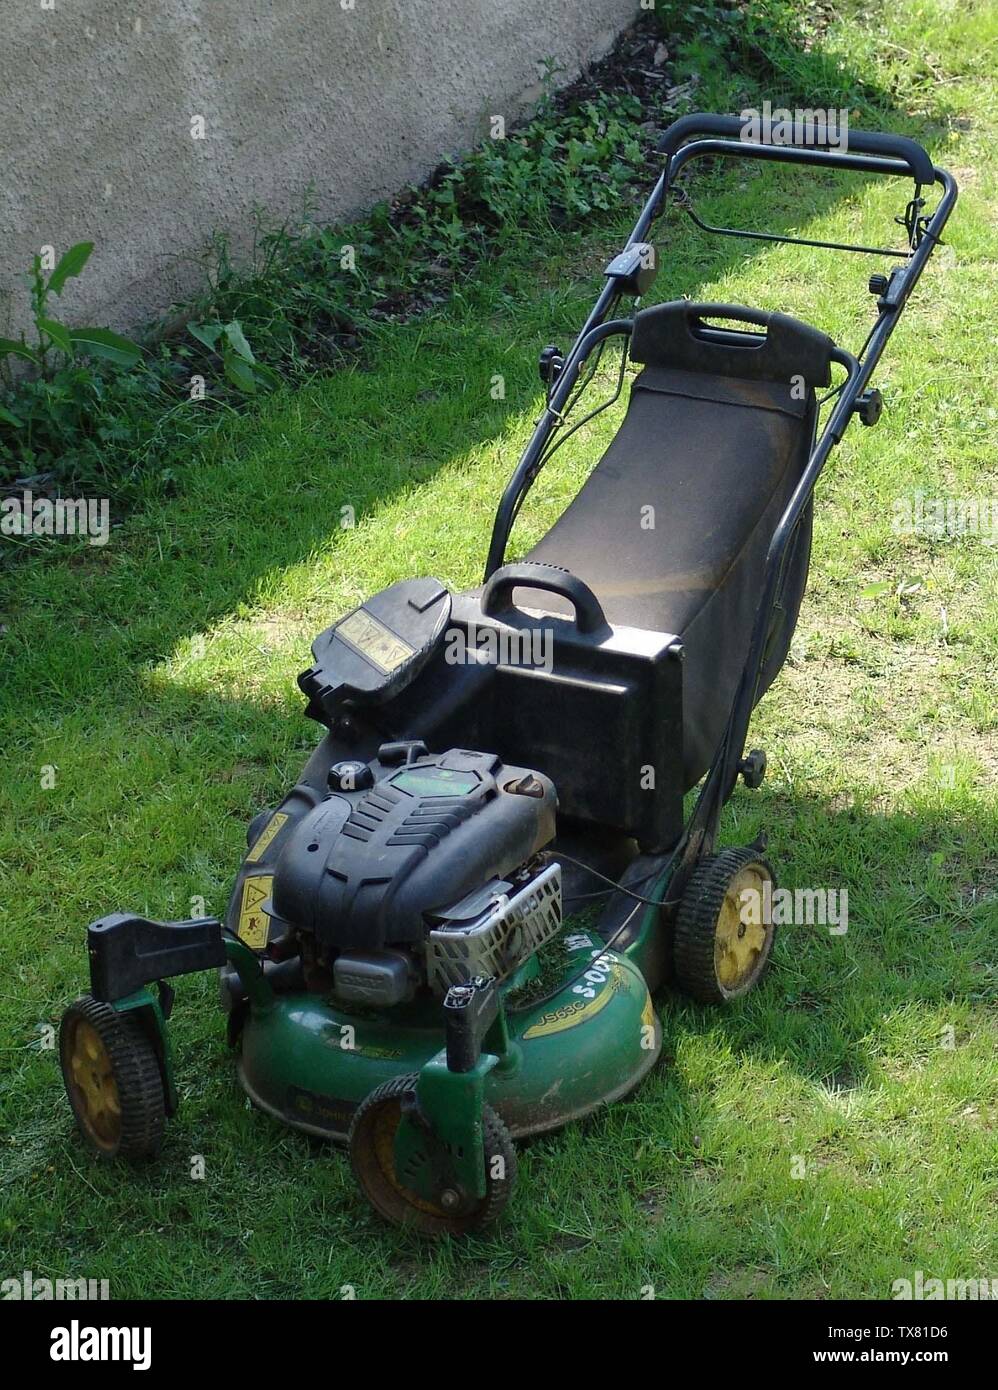 John Deere Js63c Lawn Mower Hi Res Stock Photography And Images Alamy